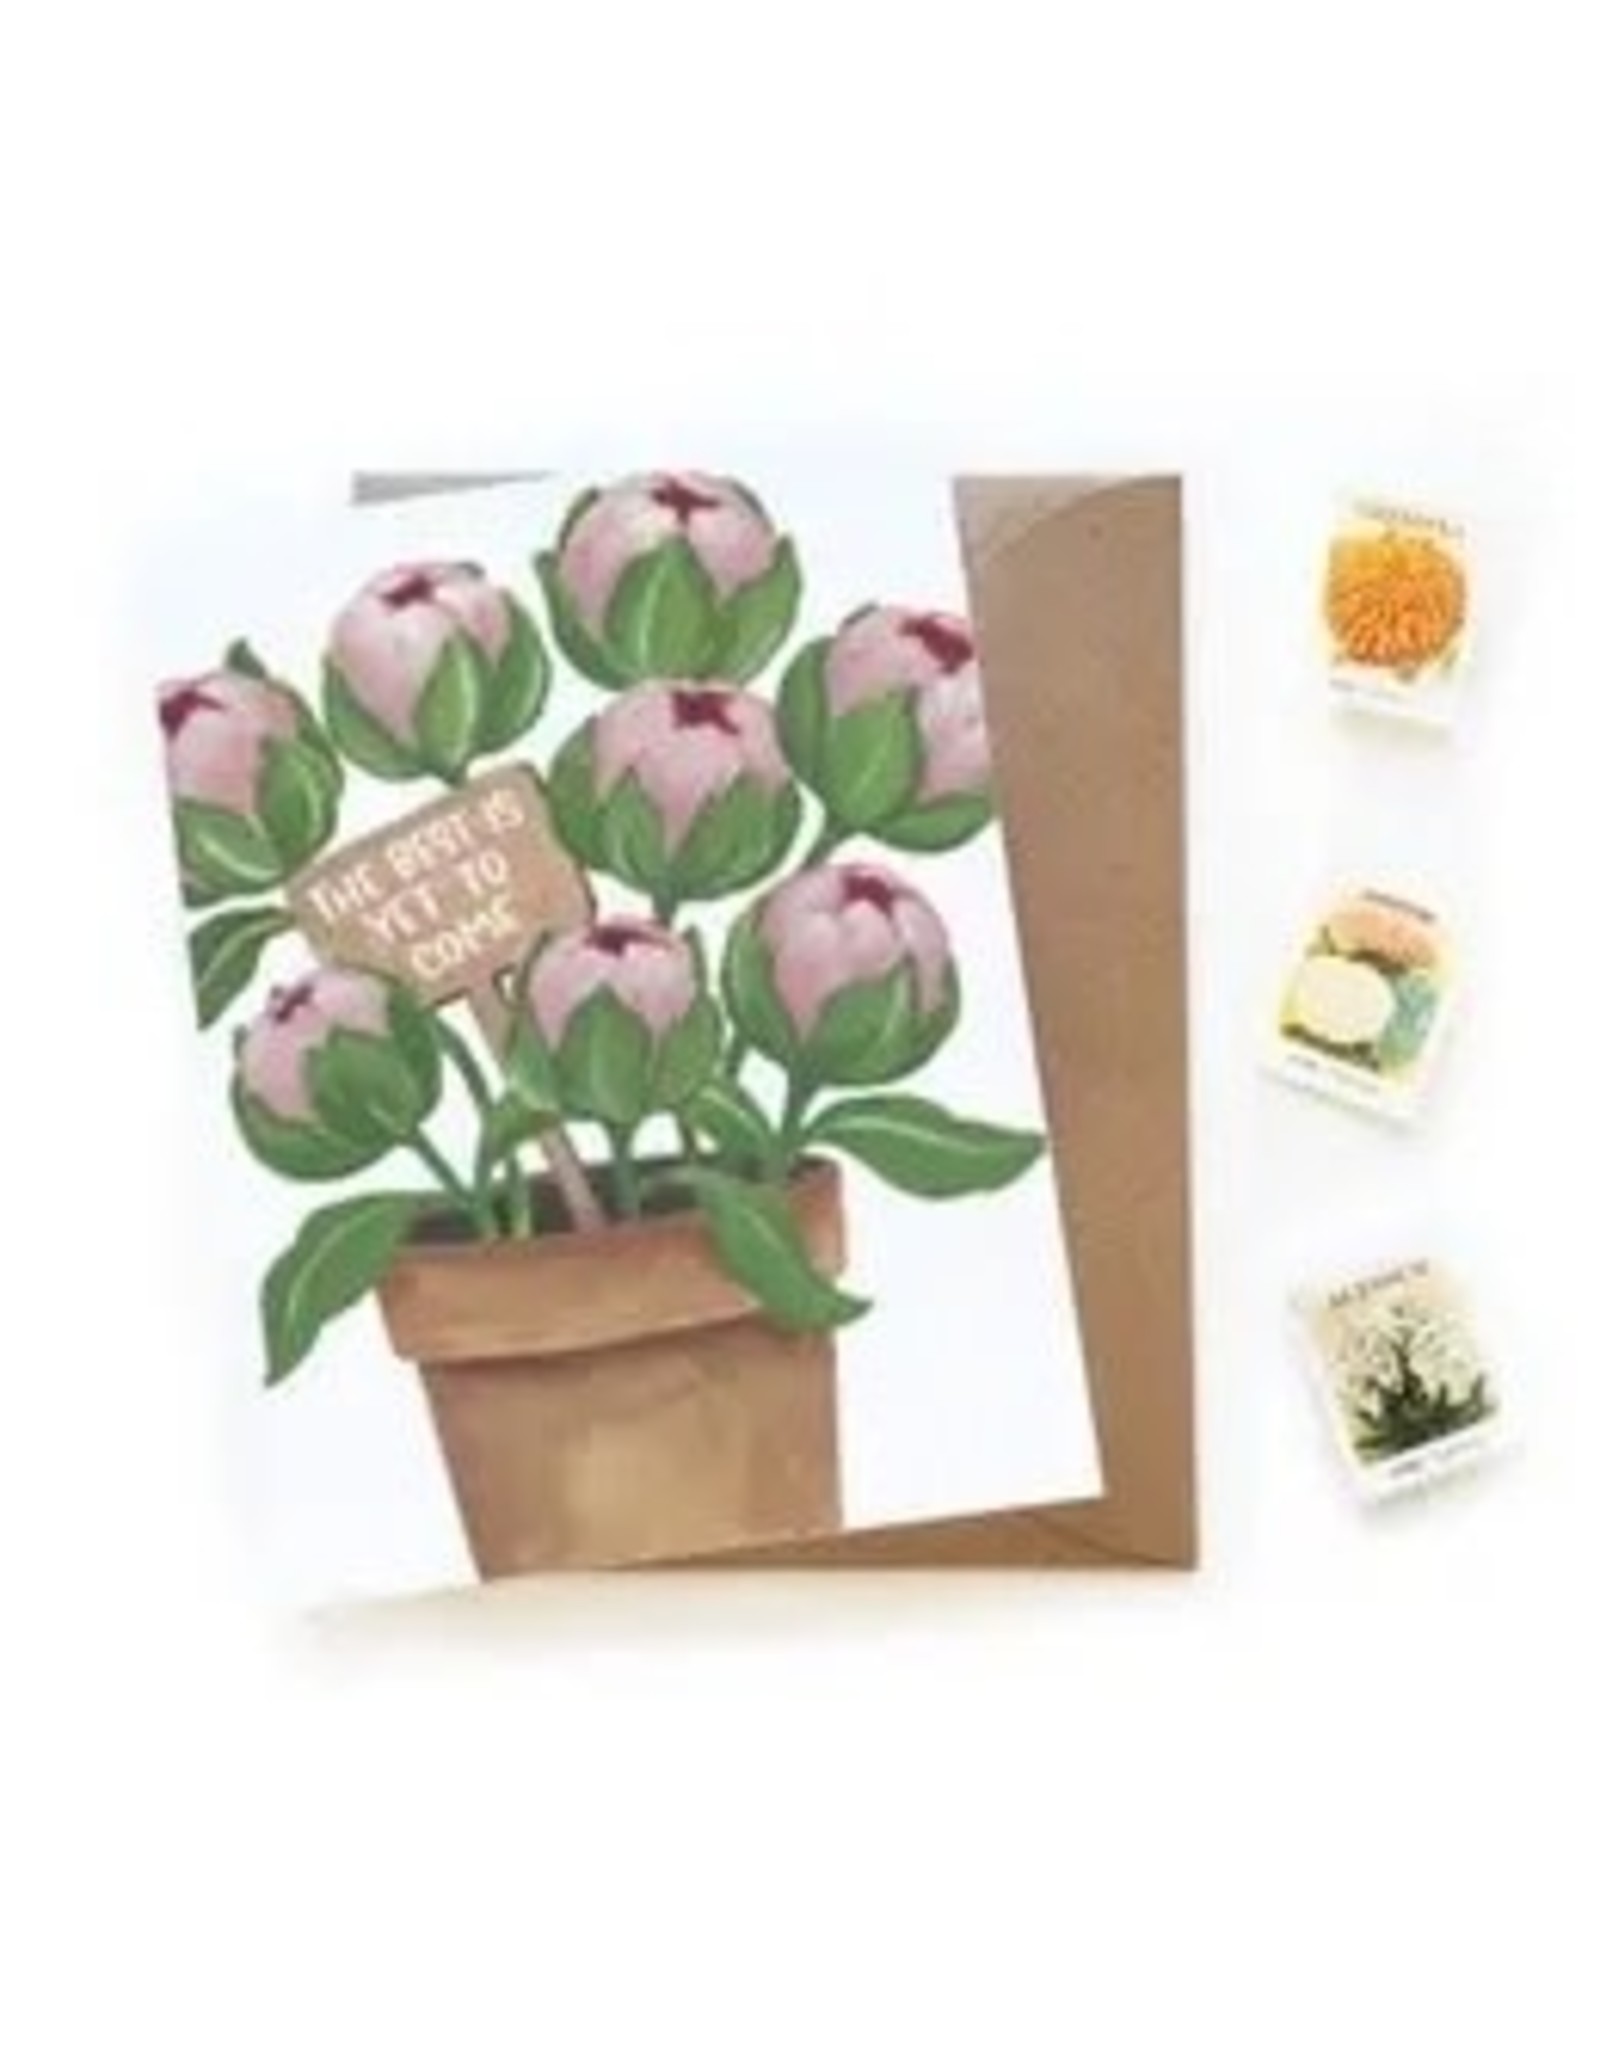 The Florist & The Merchant Blooming Peonies Greeting Card